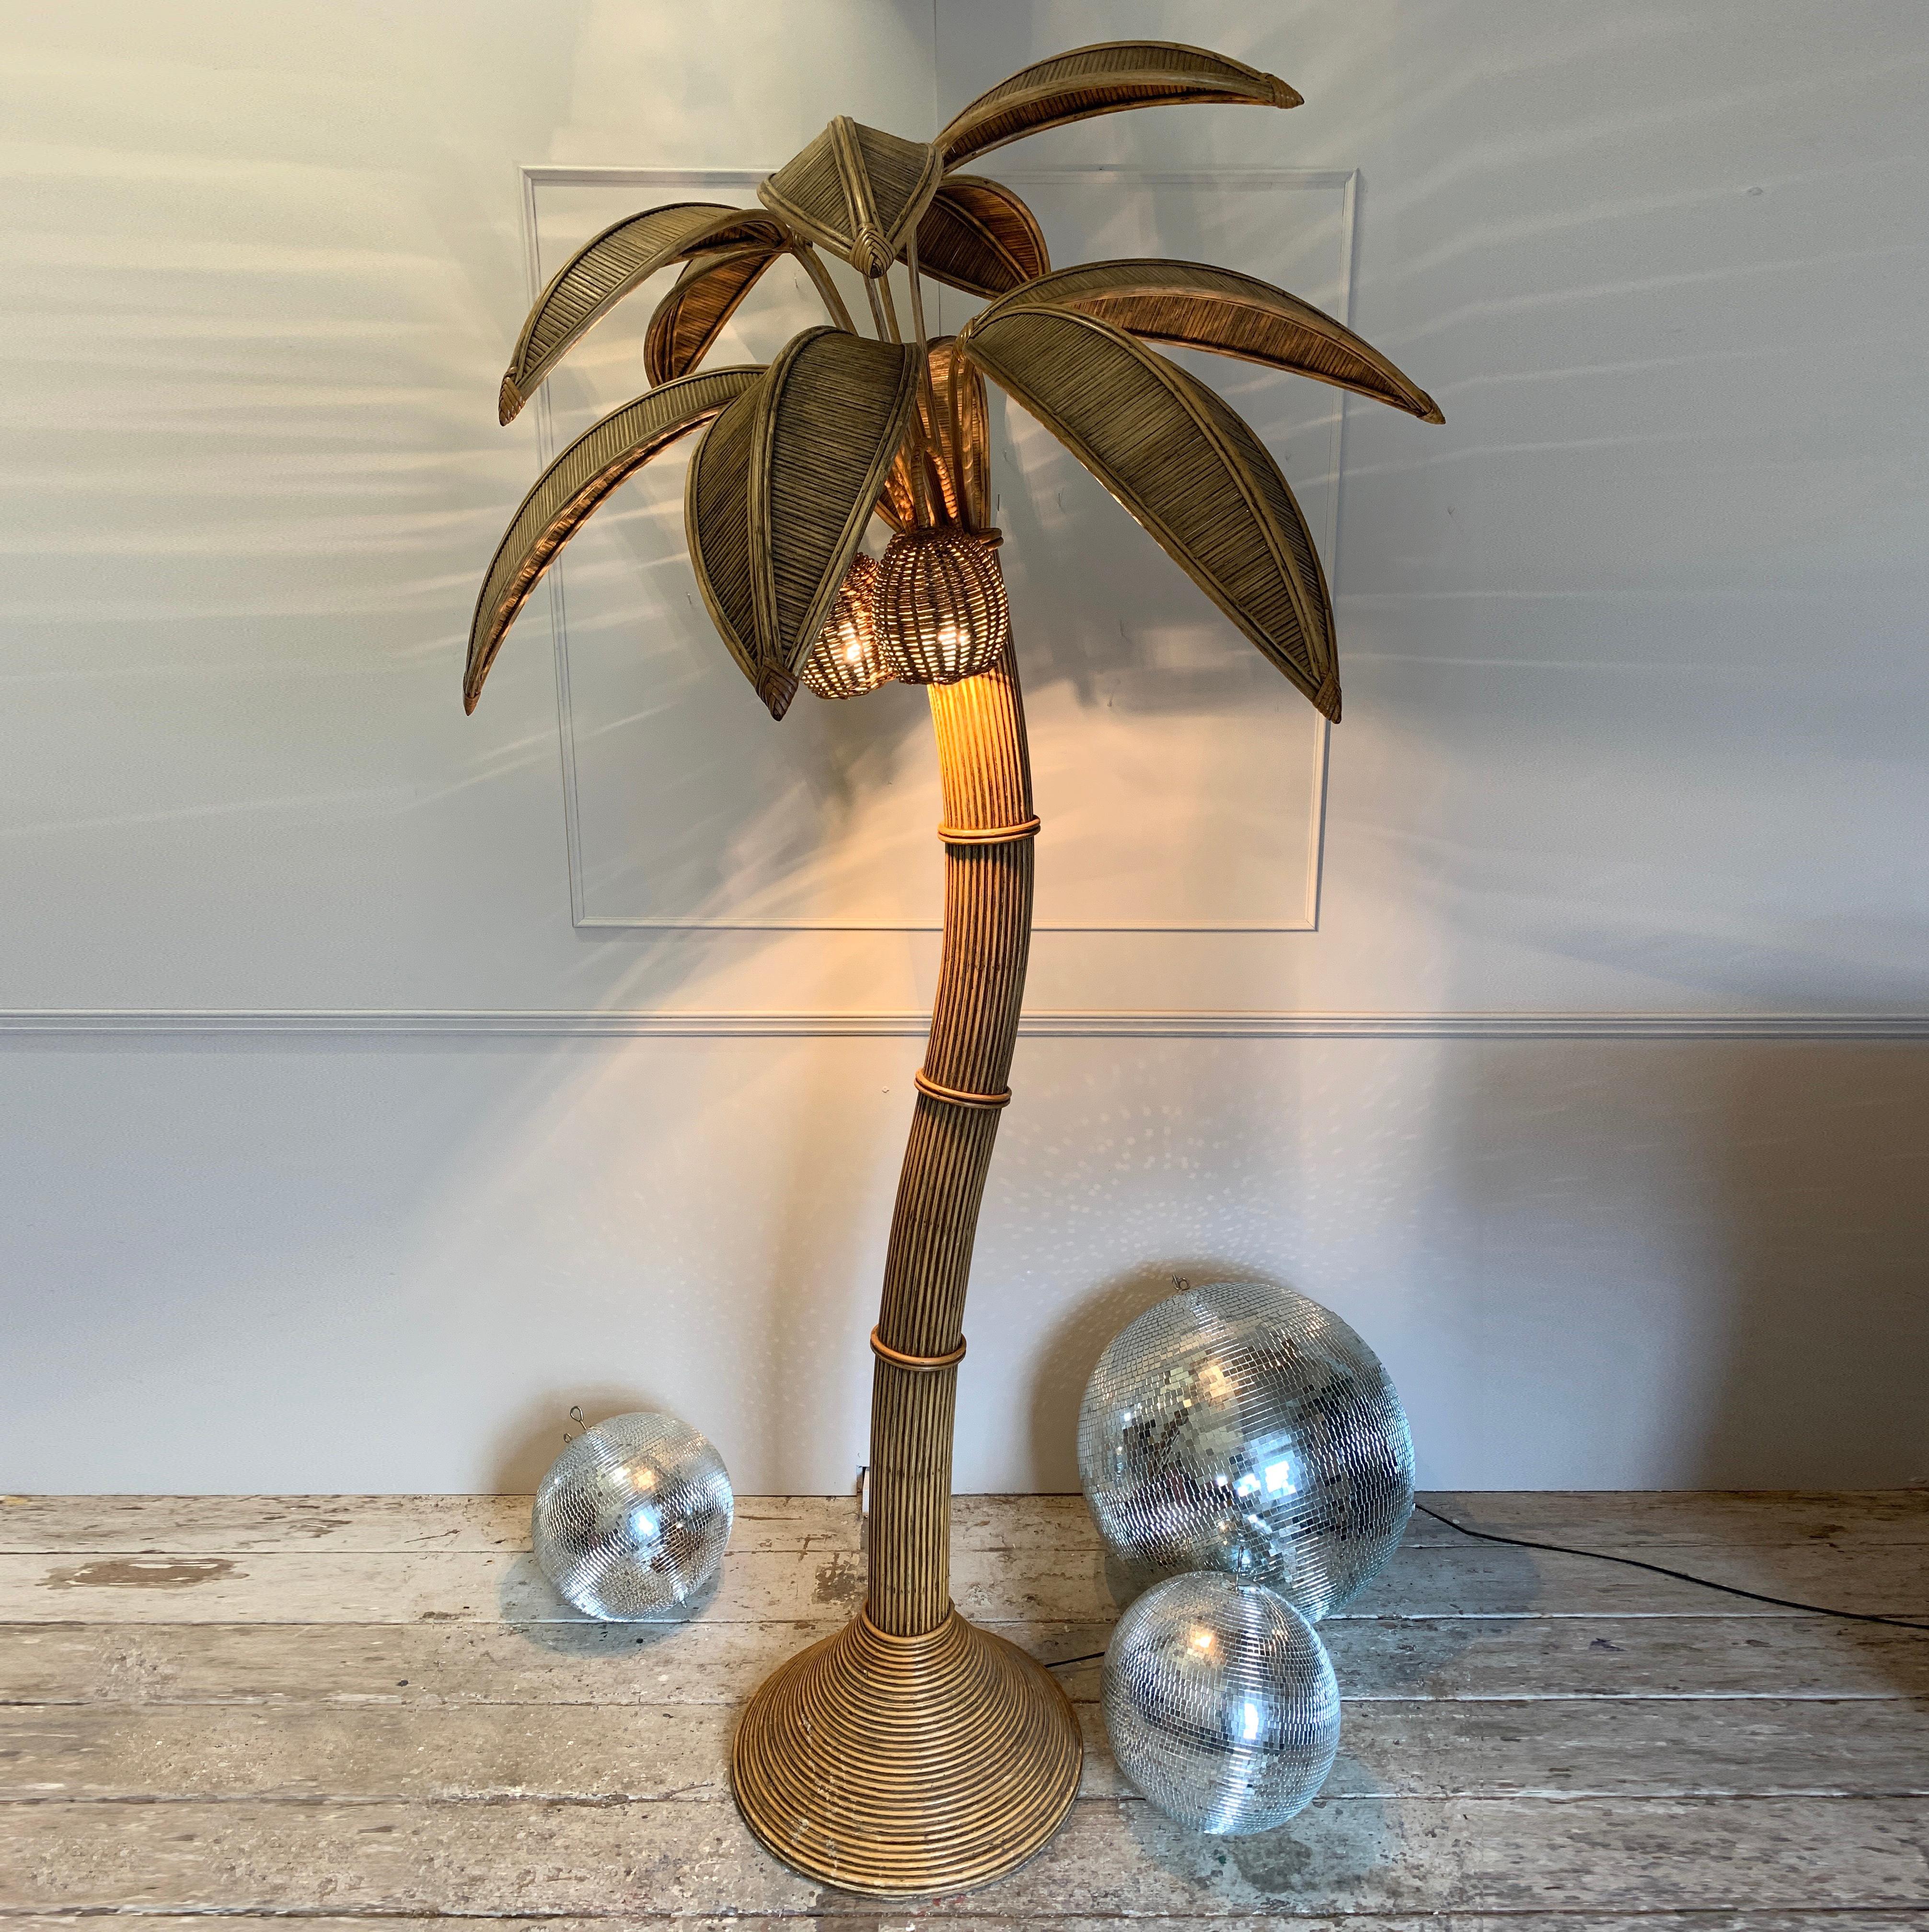 Mid Century Rattan Palm Tree Floor Lamp
In The Style Of Mario Lopez Torres
Large Rattan Palm Tree Floor Light
There Are 3 Bulbs Hidden In The Coconuts
France 1970’S
There Are 10 Leaves, 5 Large, 5 Smaller. These Are Removable And